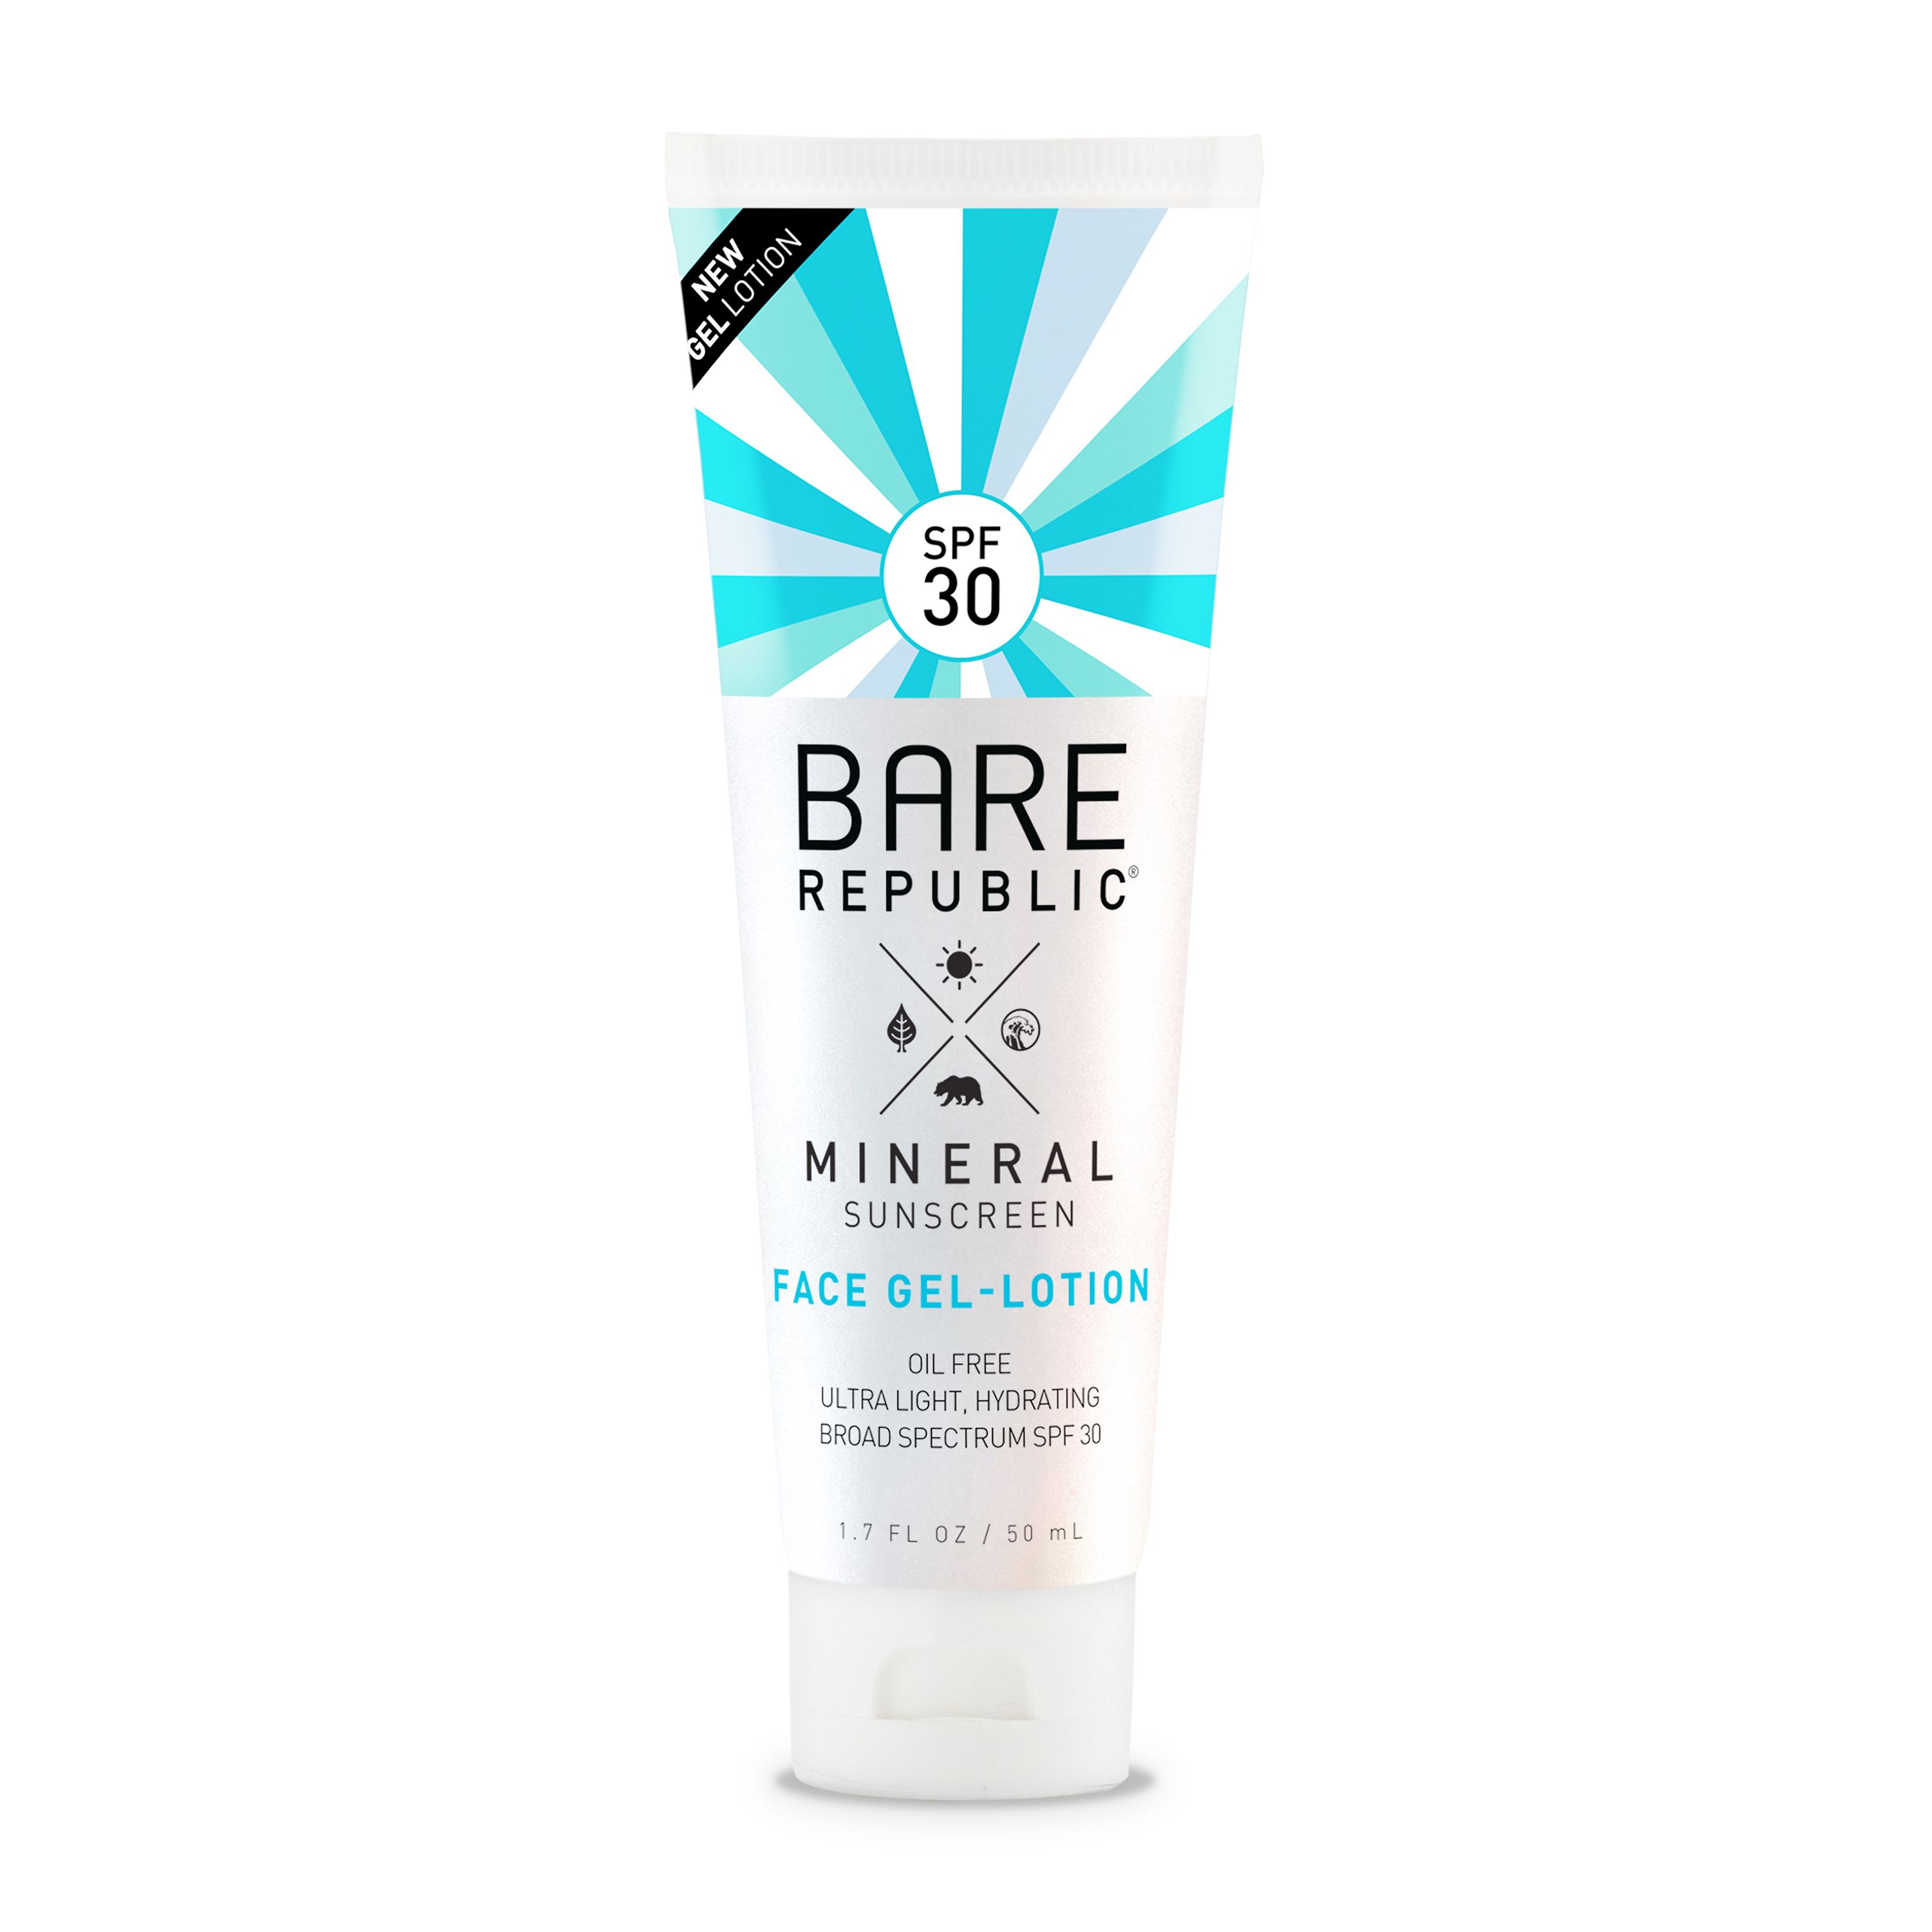 Mineral SPF 30 Sunscreen Face Gel-Lotion